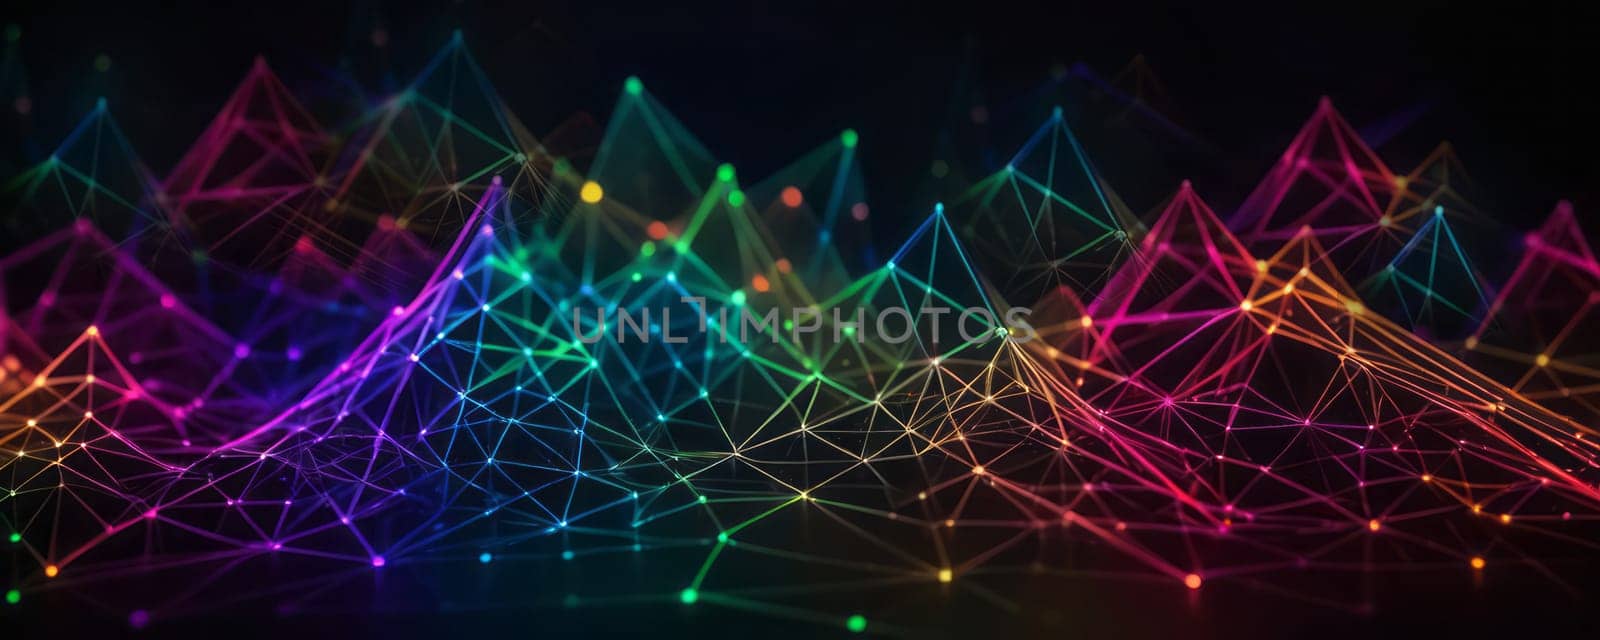 The image presents a vibrant network of interconnected lines and dots, forming a complex geometric pattern. The lines glow in a spectrum of colors like blue, pink, yellow, and green against a dark background. The image conveys a sense of futuristic technology and dynamic connectivity. Generative AI